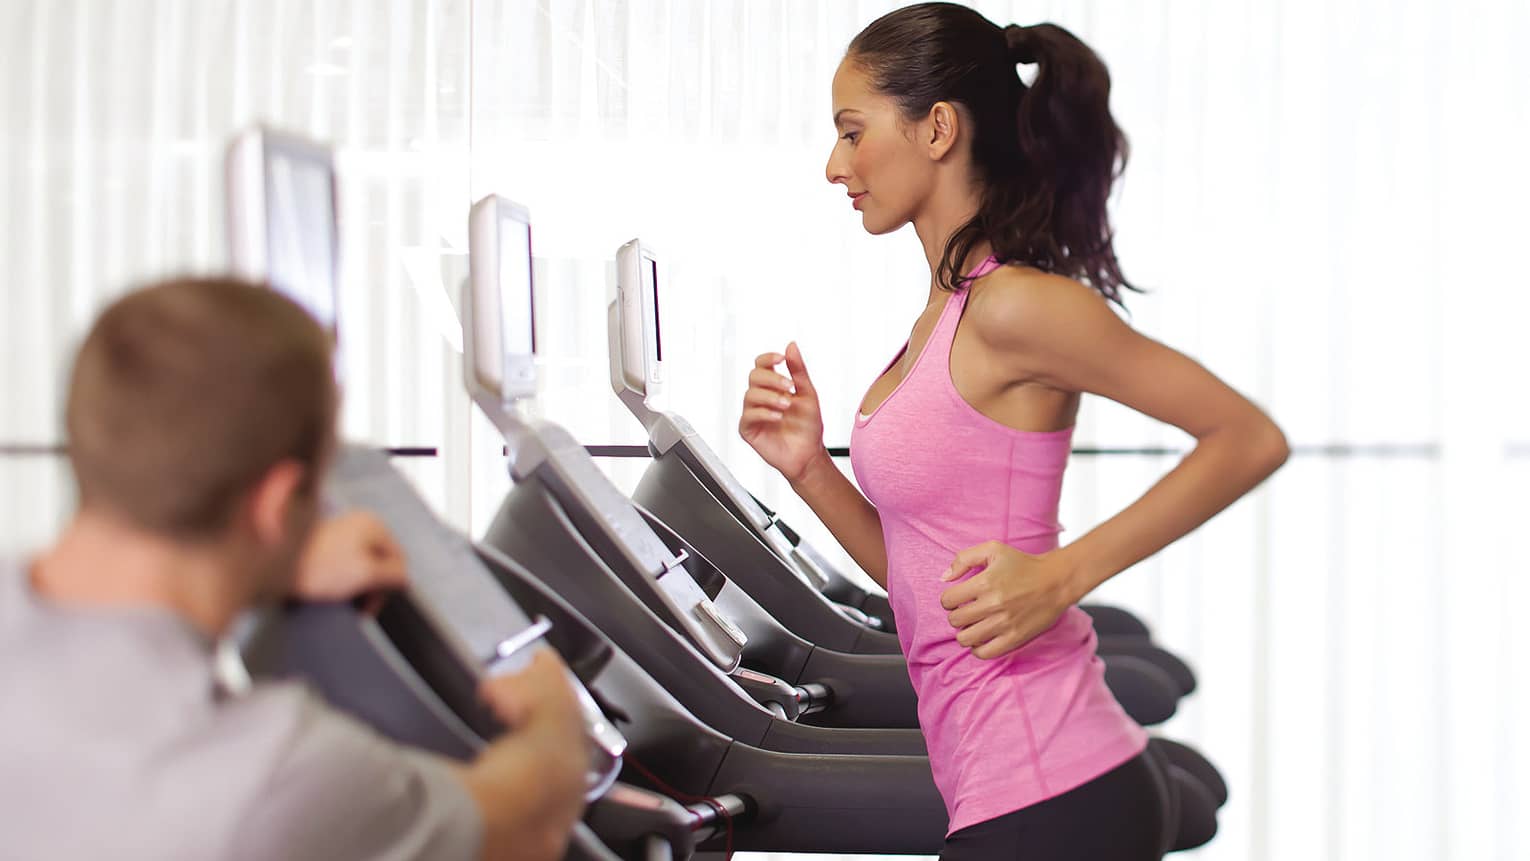 Woman in pink sleeveless shirt and ponytail runs on treadmill as personal trainer watches